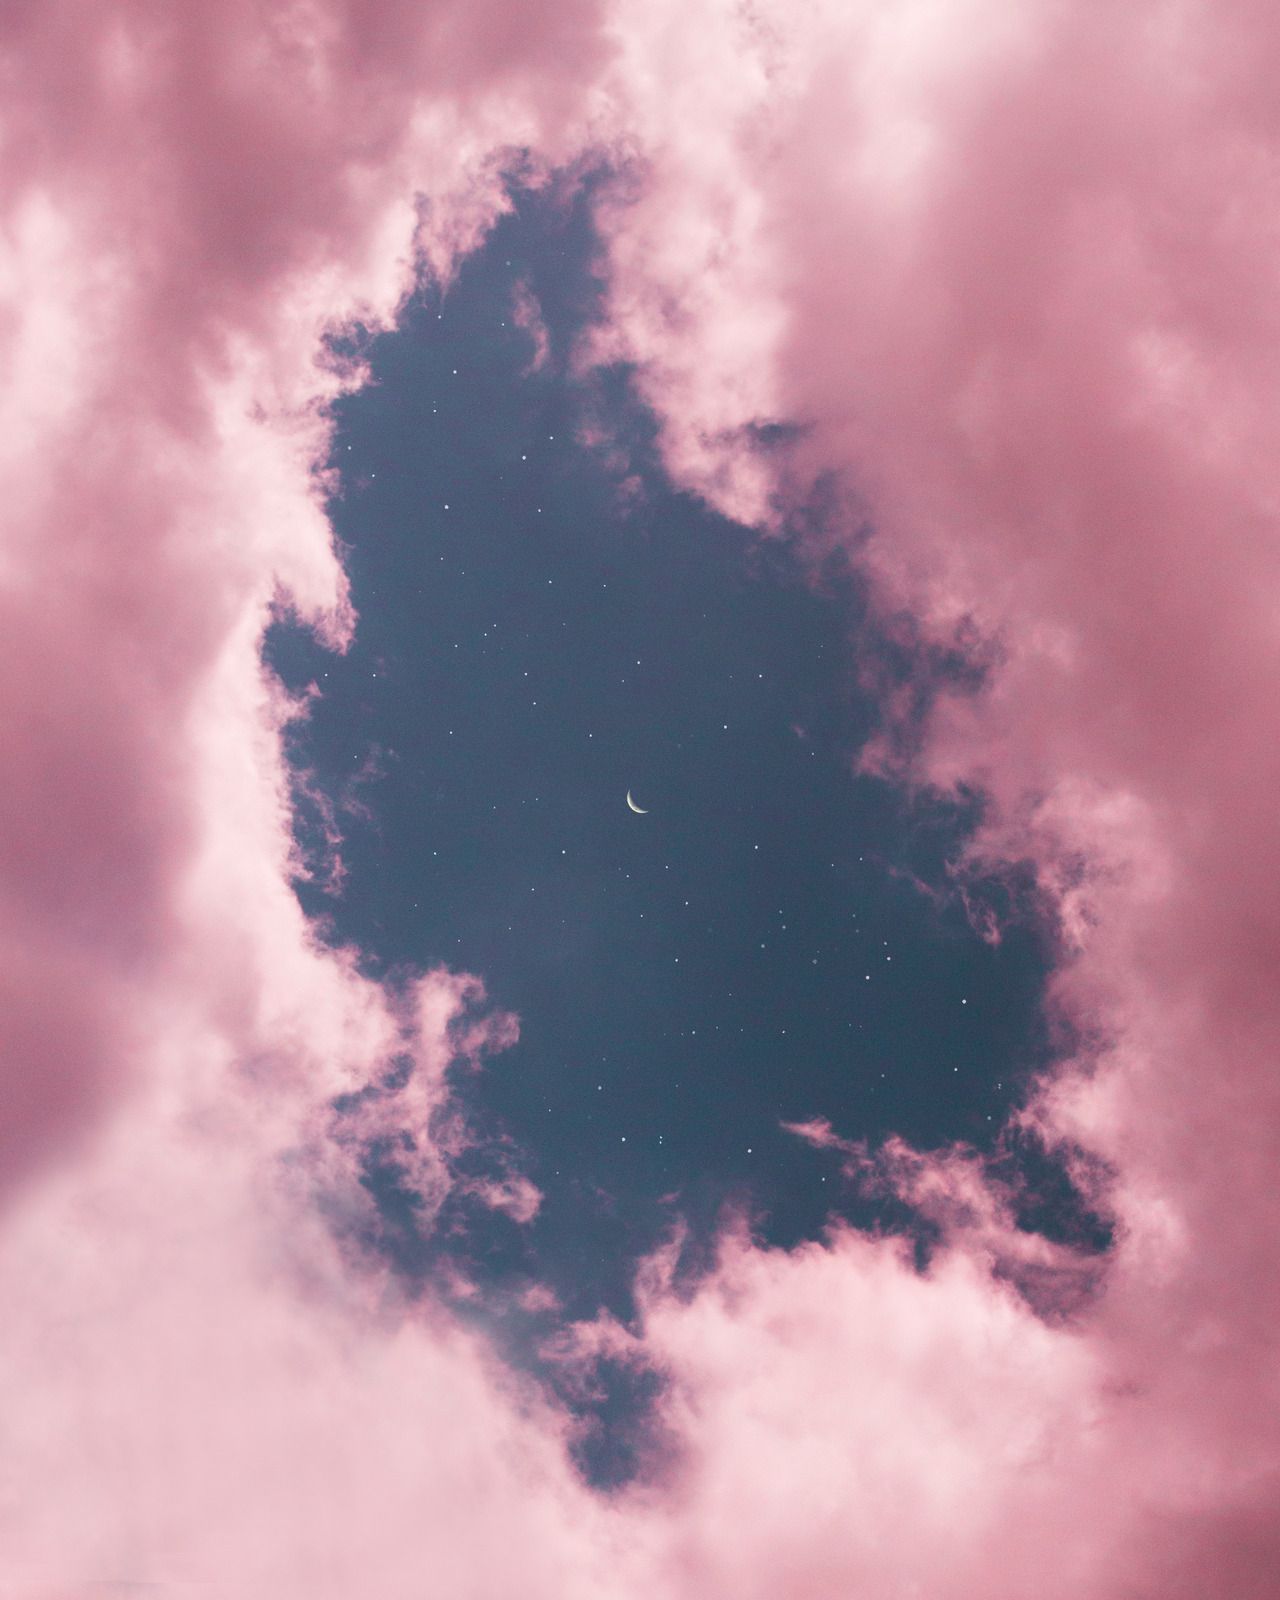 A pink cloud with blue sky in the background - Vintage clouds, Cupid